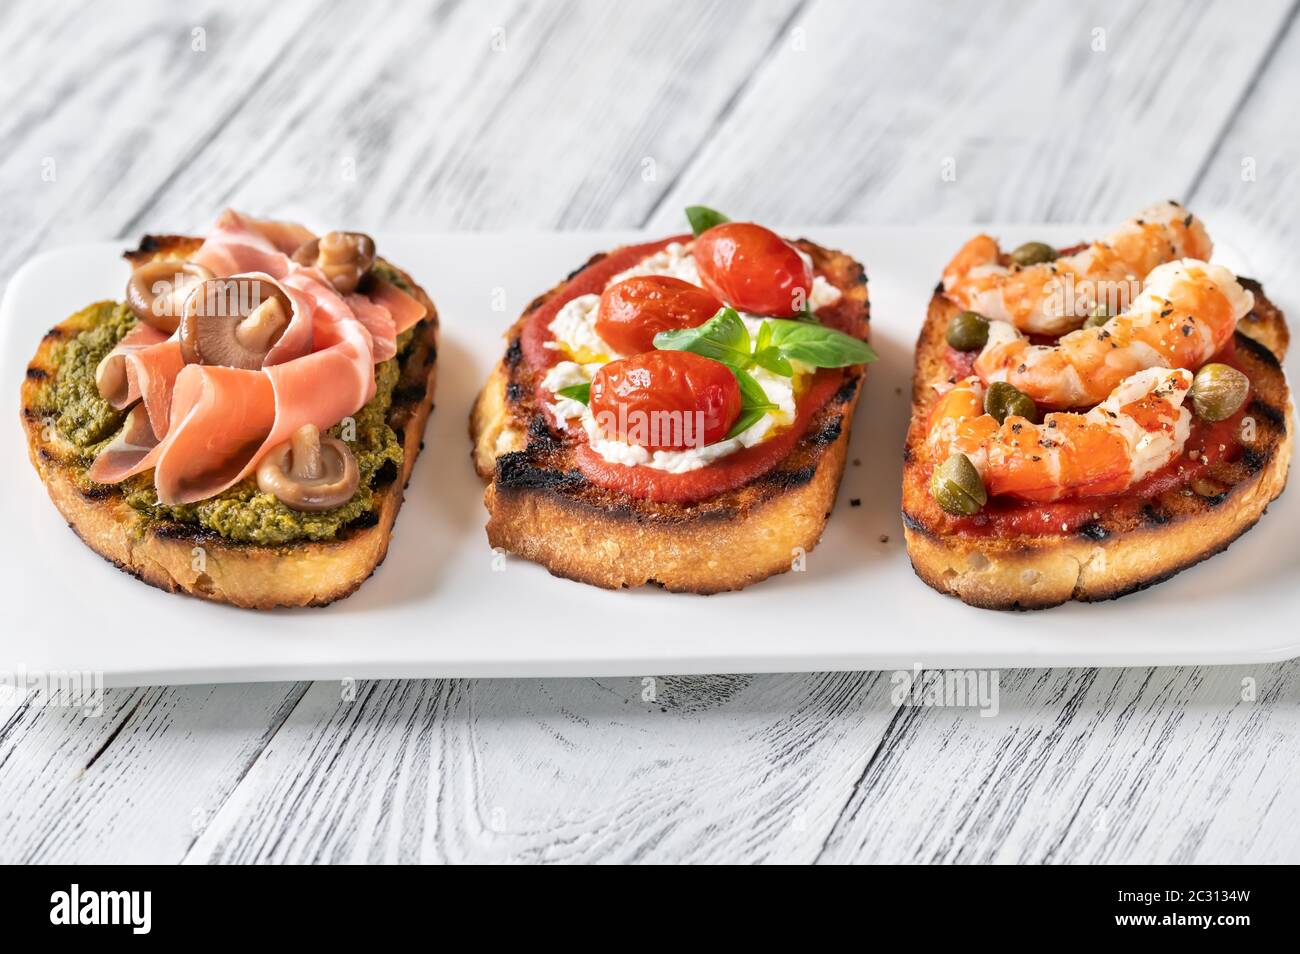 Assortment of Italian bruschettas with different toppings Stock Photo